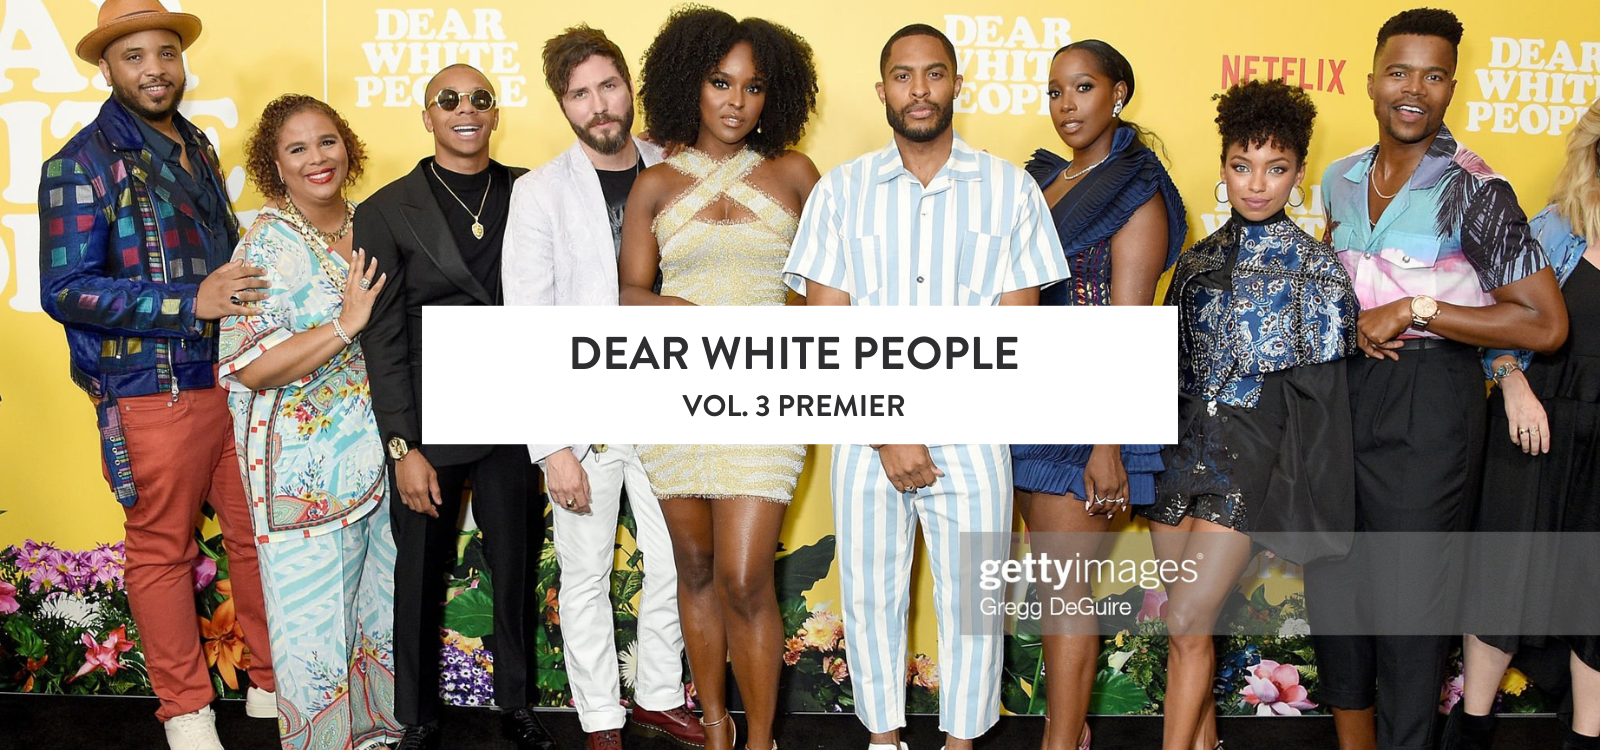 The 'Dear White People' Vol. 3 Premiere Was POPPIN' With Melanin, Edgy 'Fits & #BlackExcellence